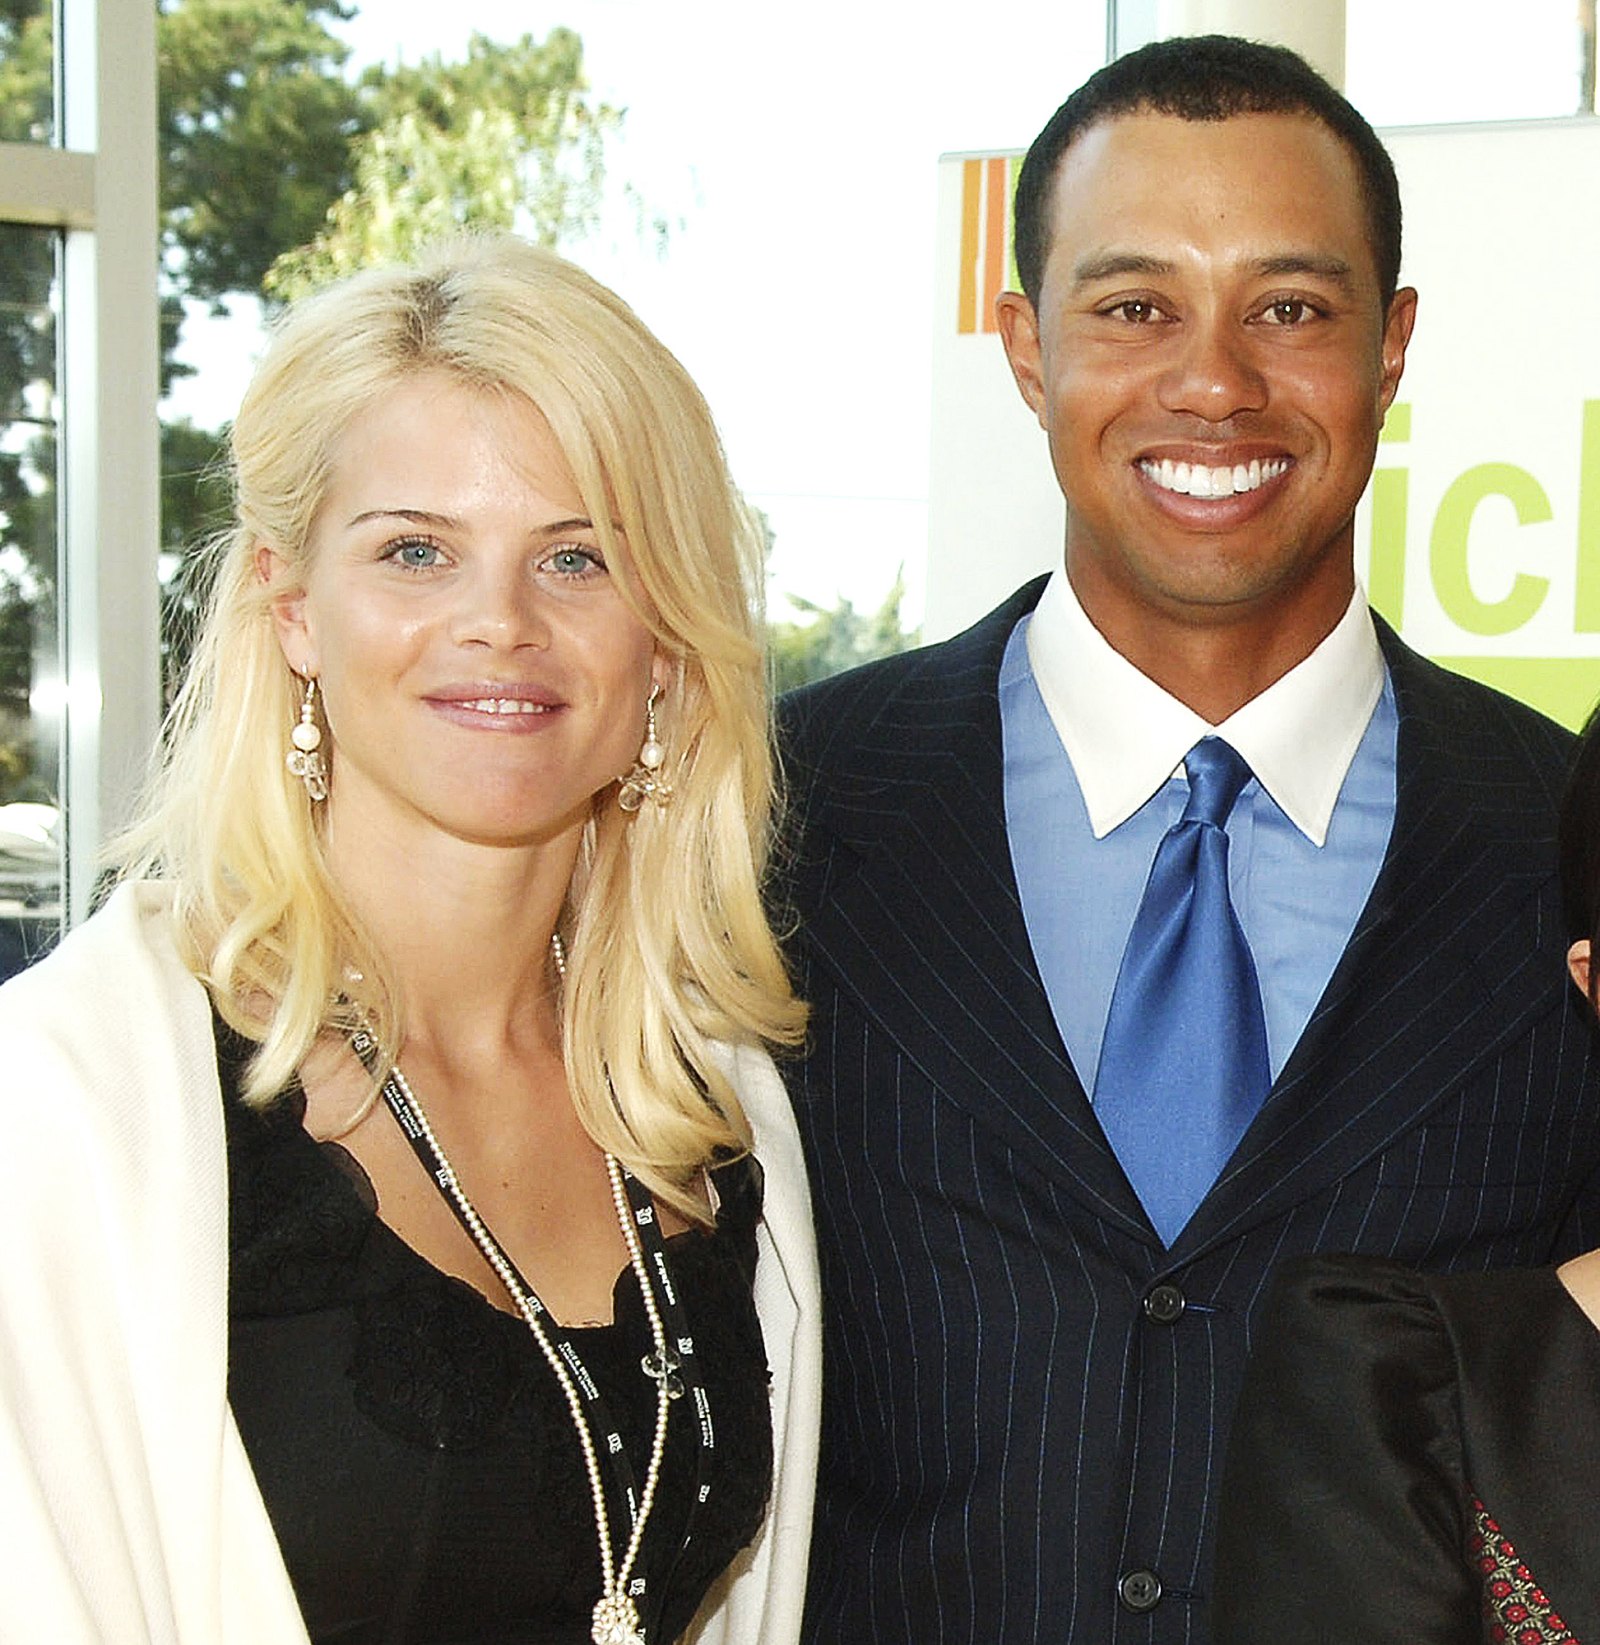 Tiger Woods’ ex-wife Elin Nordegren, 39, is pregnant with 30-year-old ...